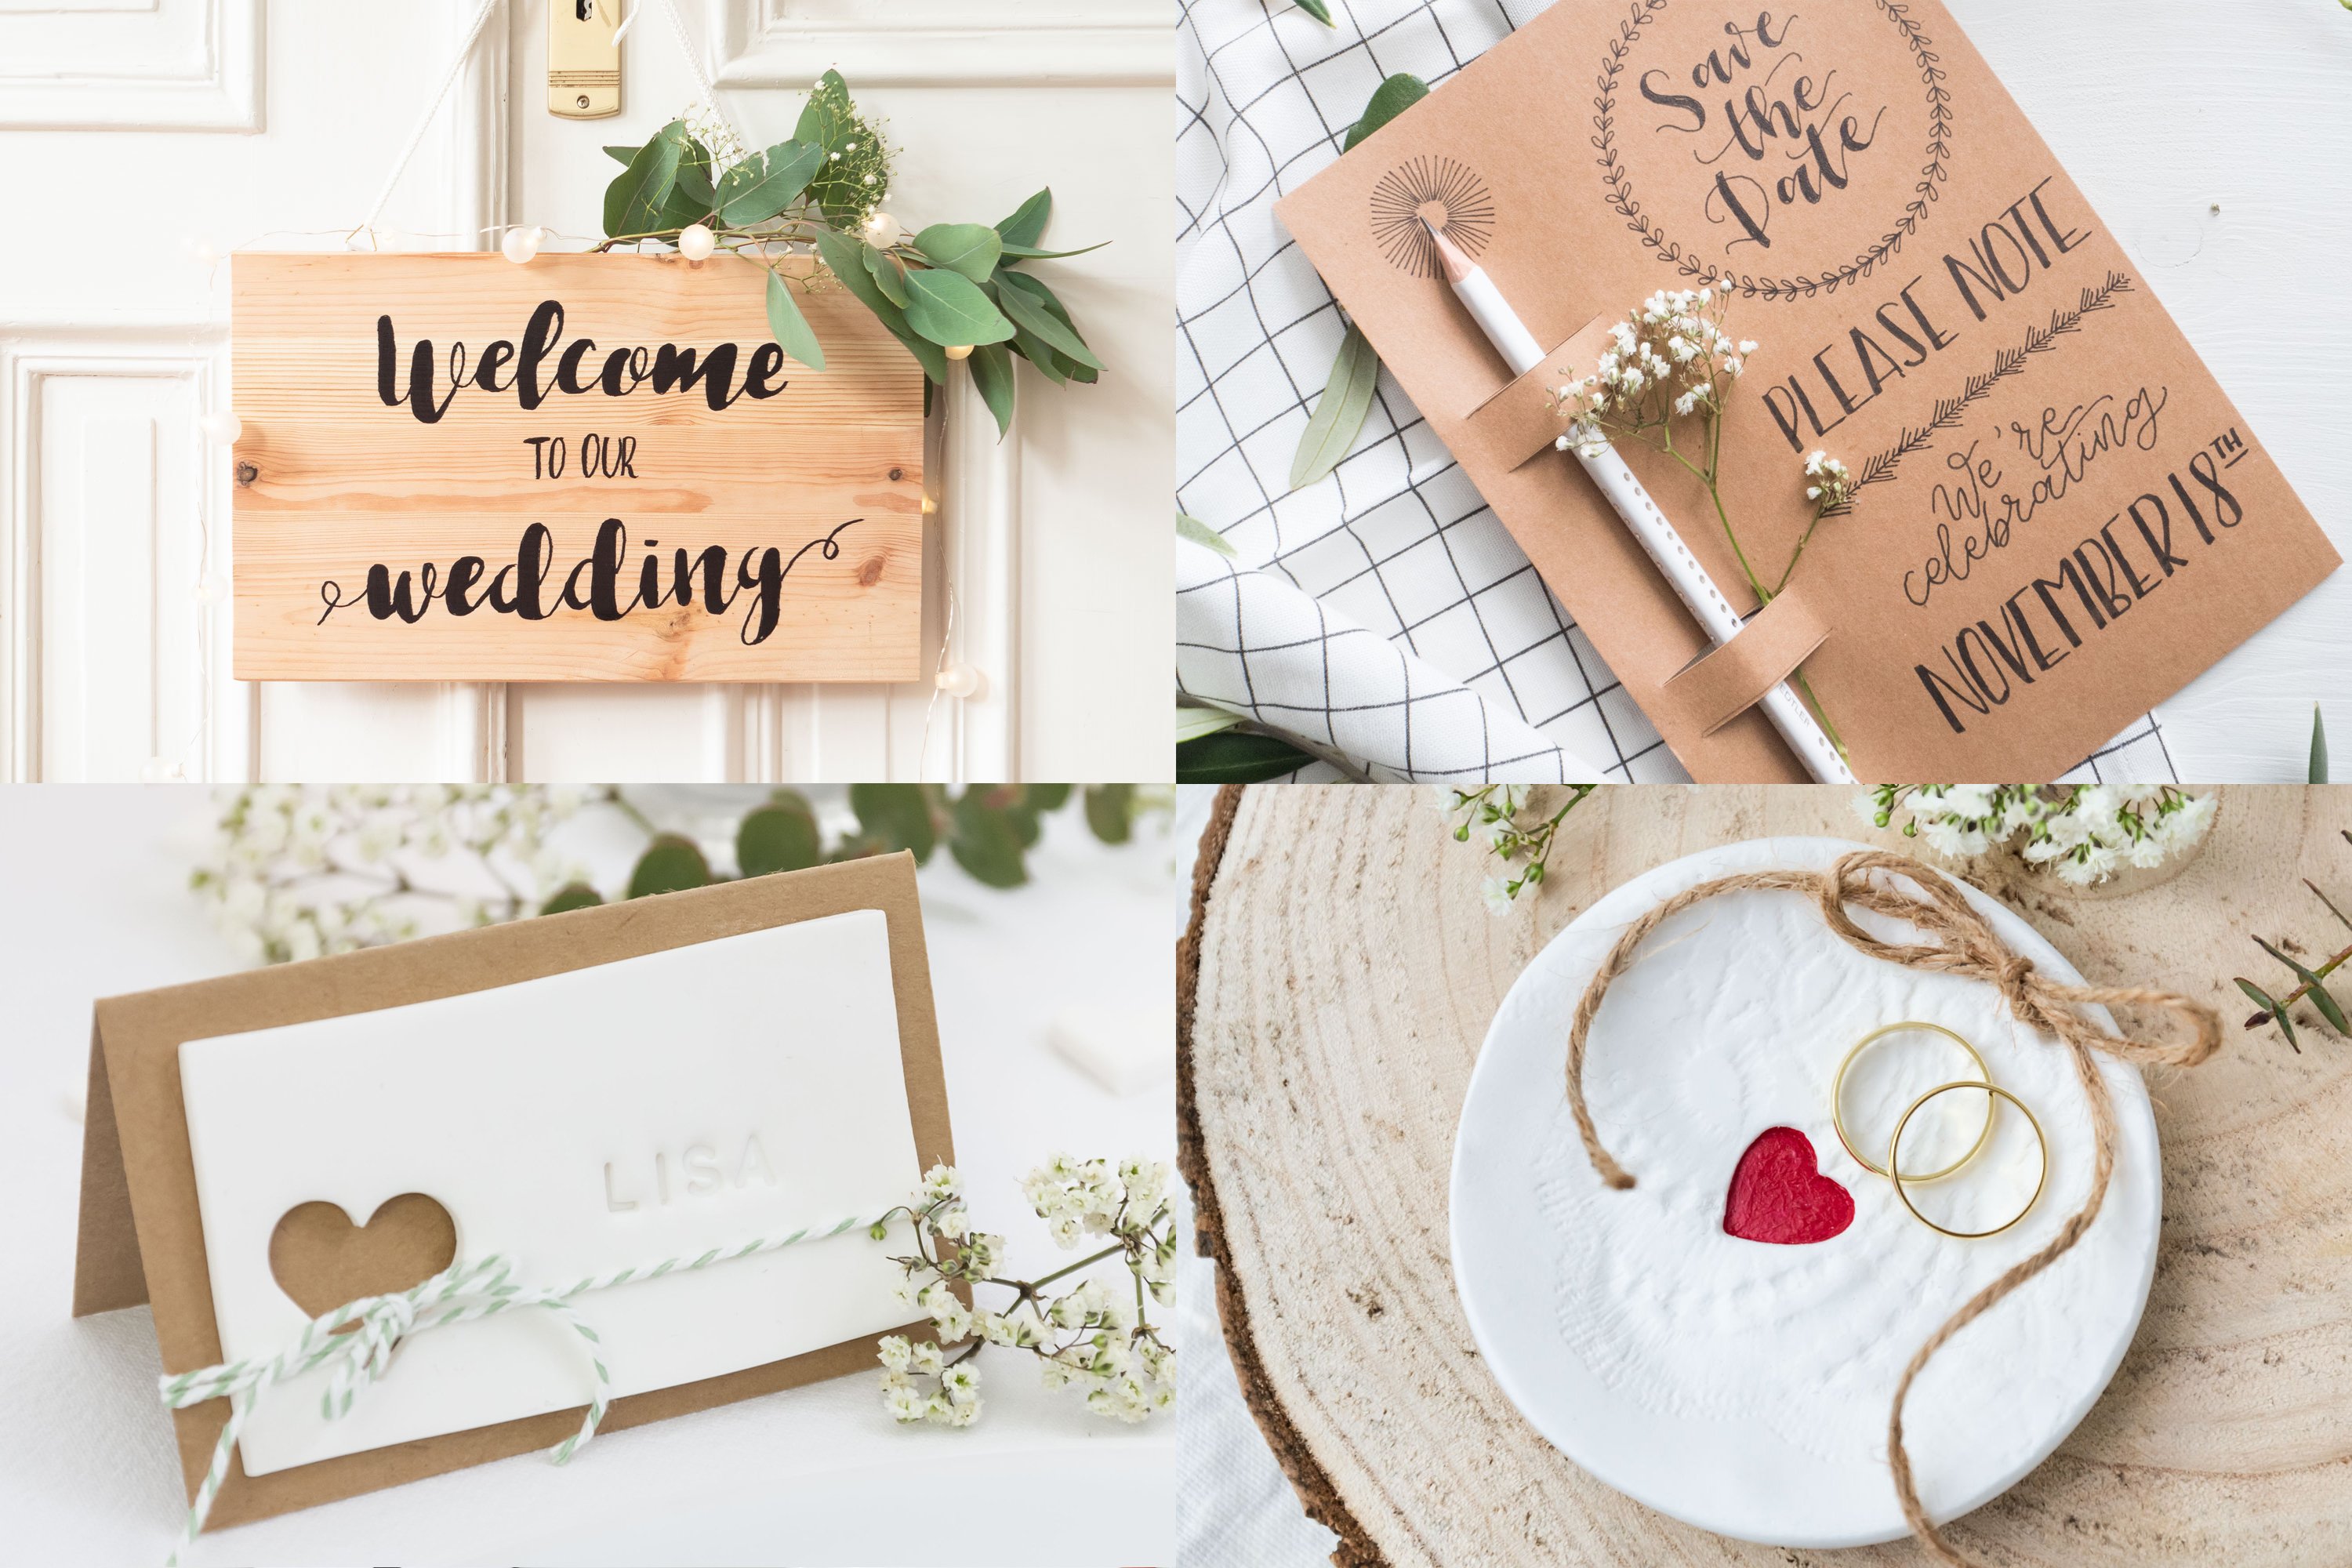 DIY wedding: Ideas and instructions for the most beautiful day of your life